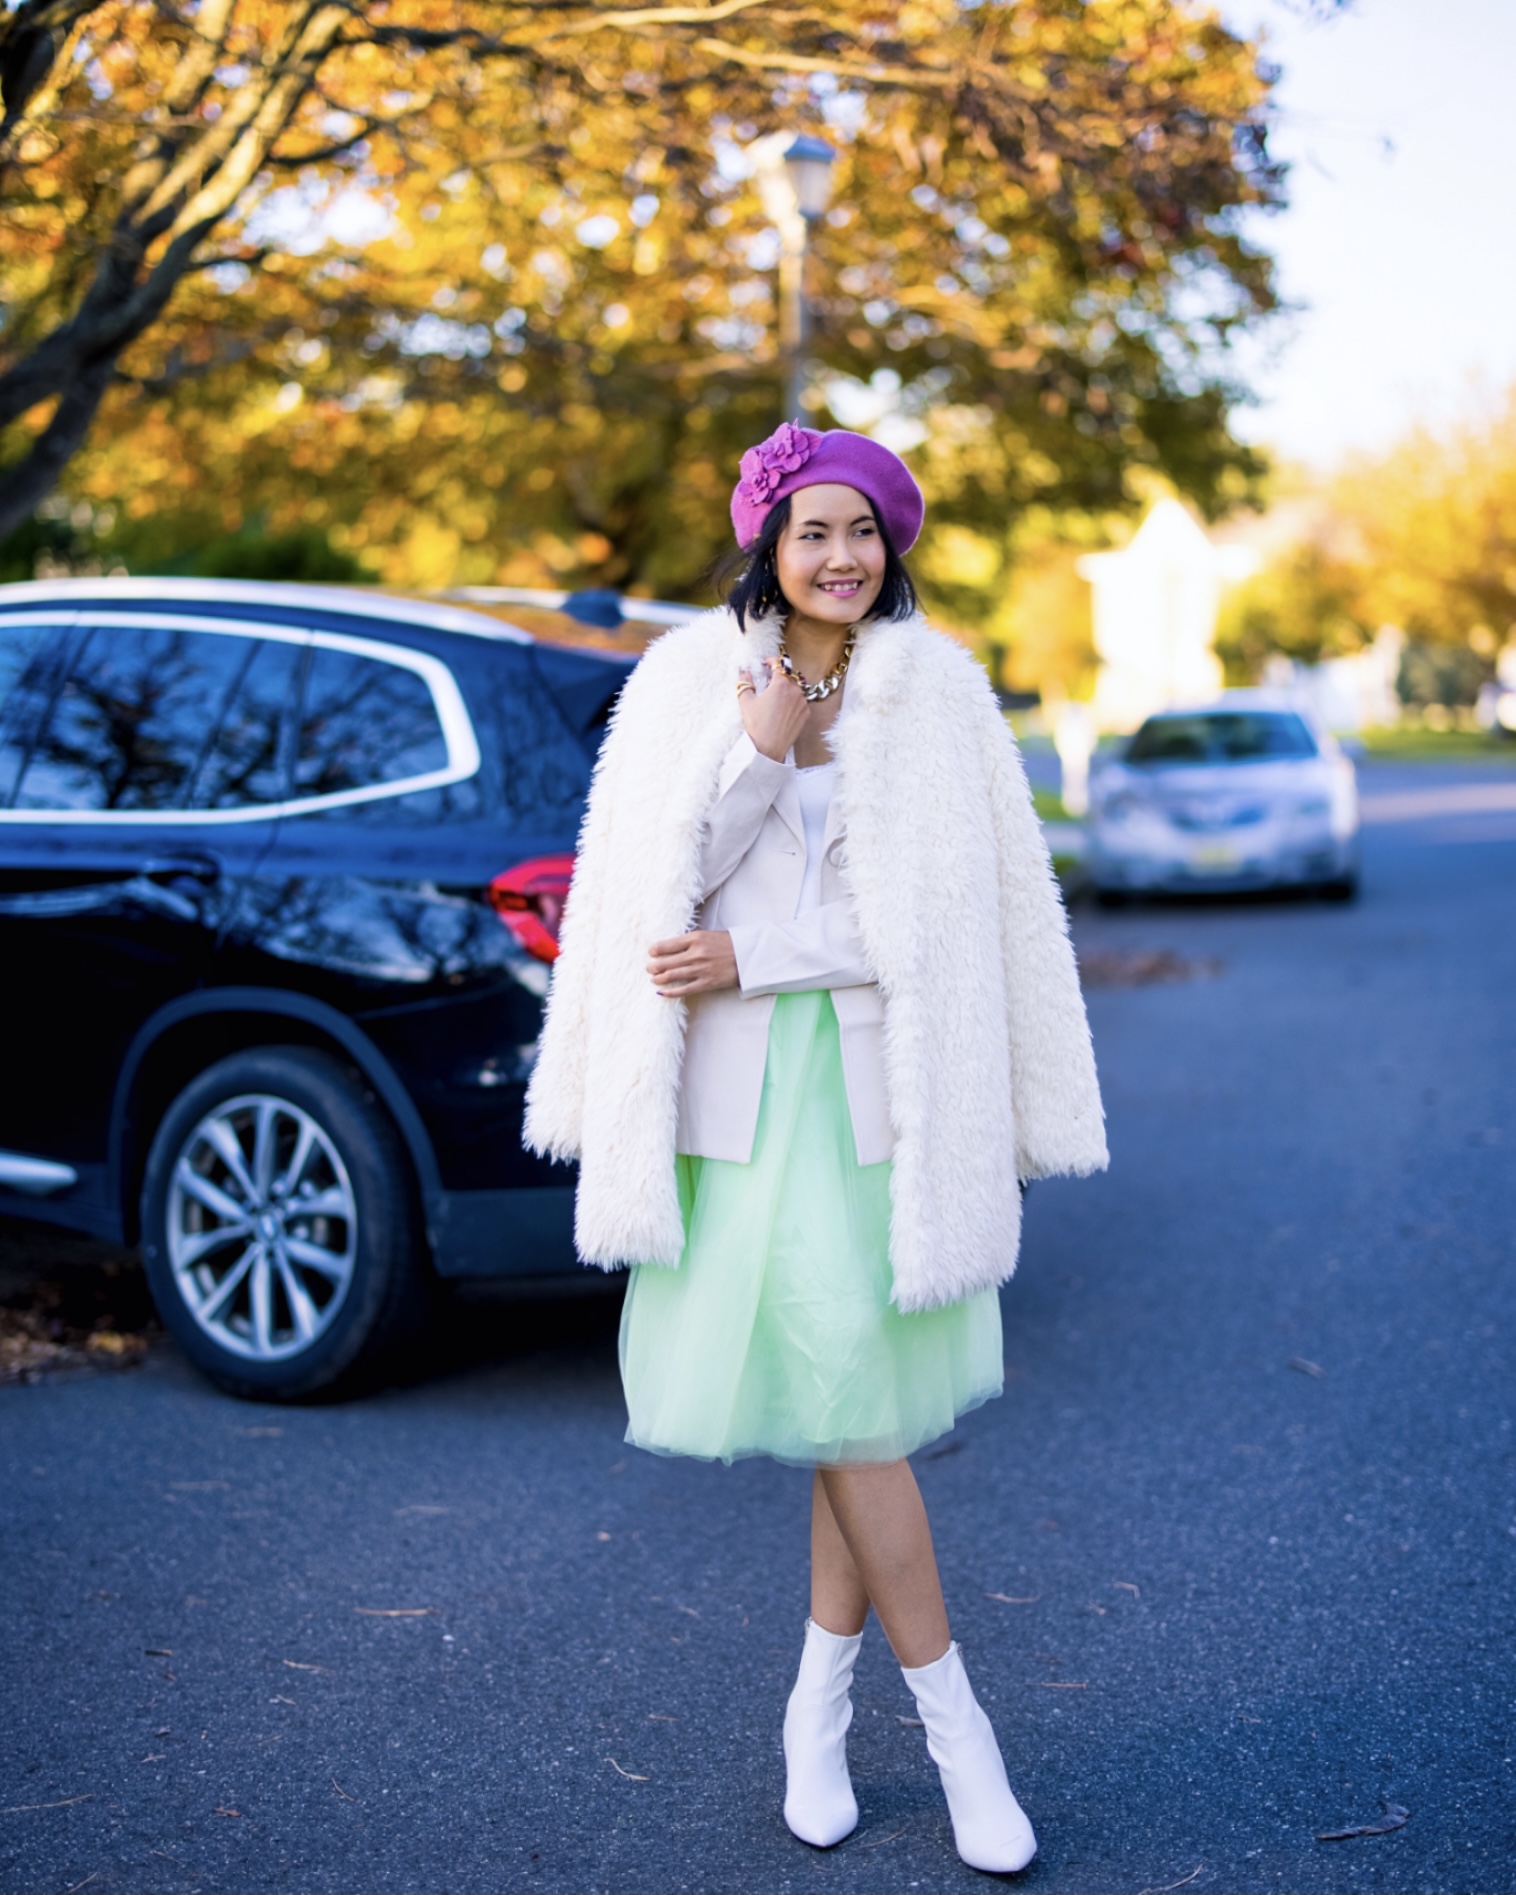 nanphanita is channeling carrie bradshaw in sex and the city with a green tulle dress and womens wool beret with flowers by san diego hat company